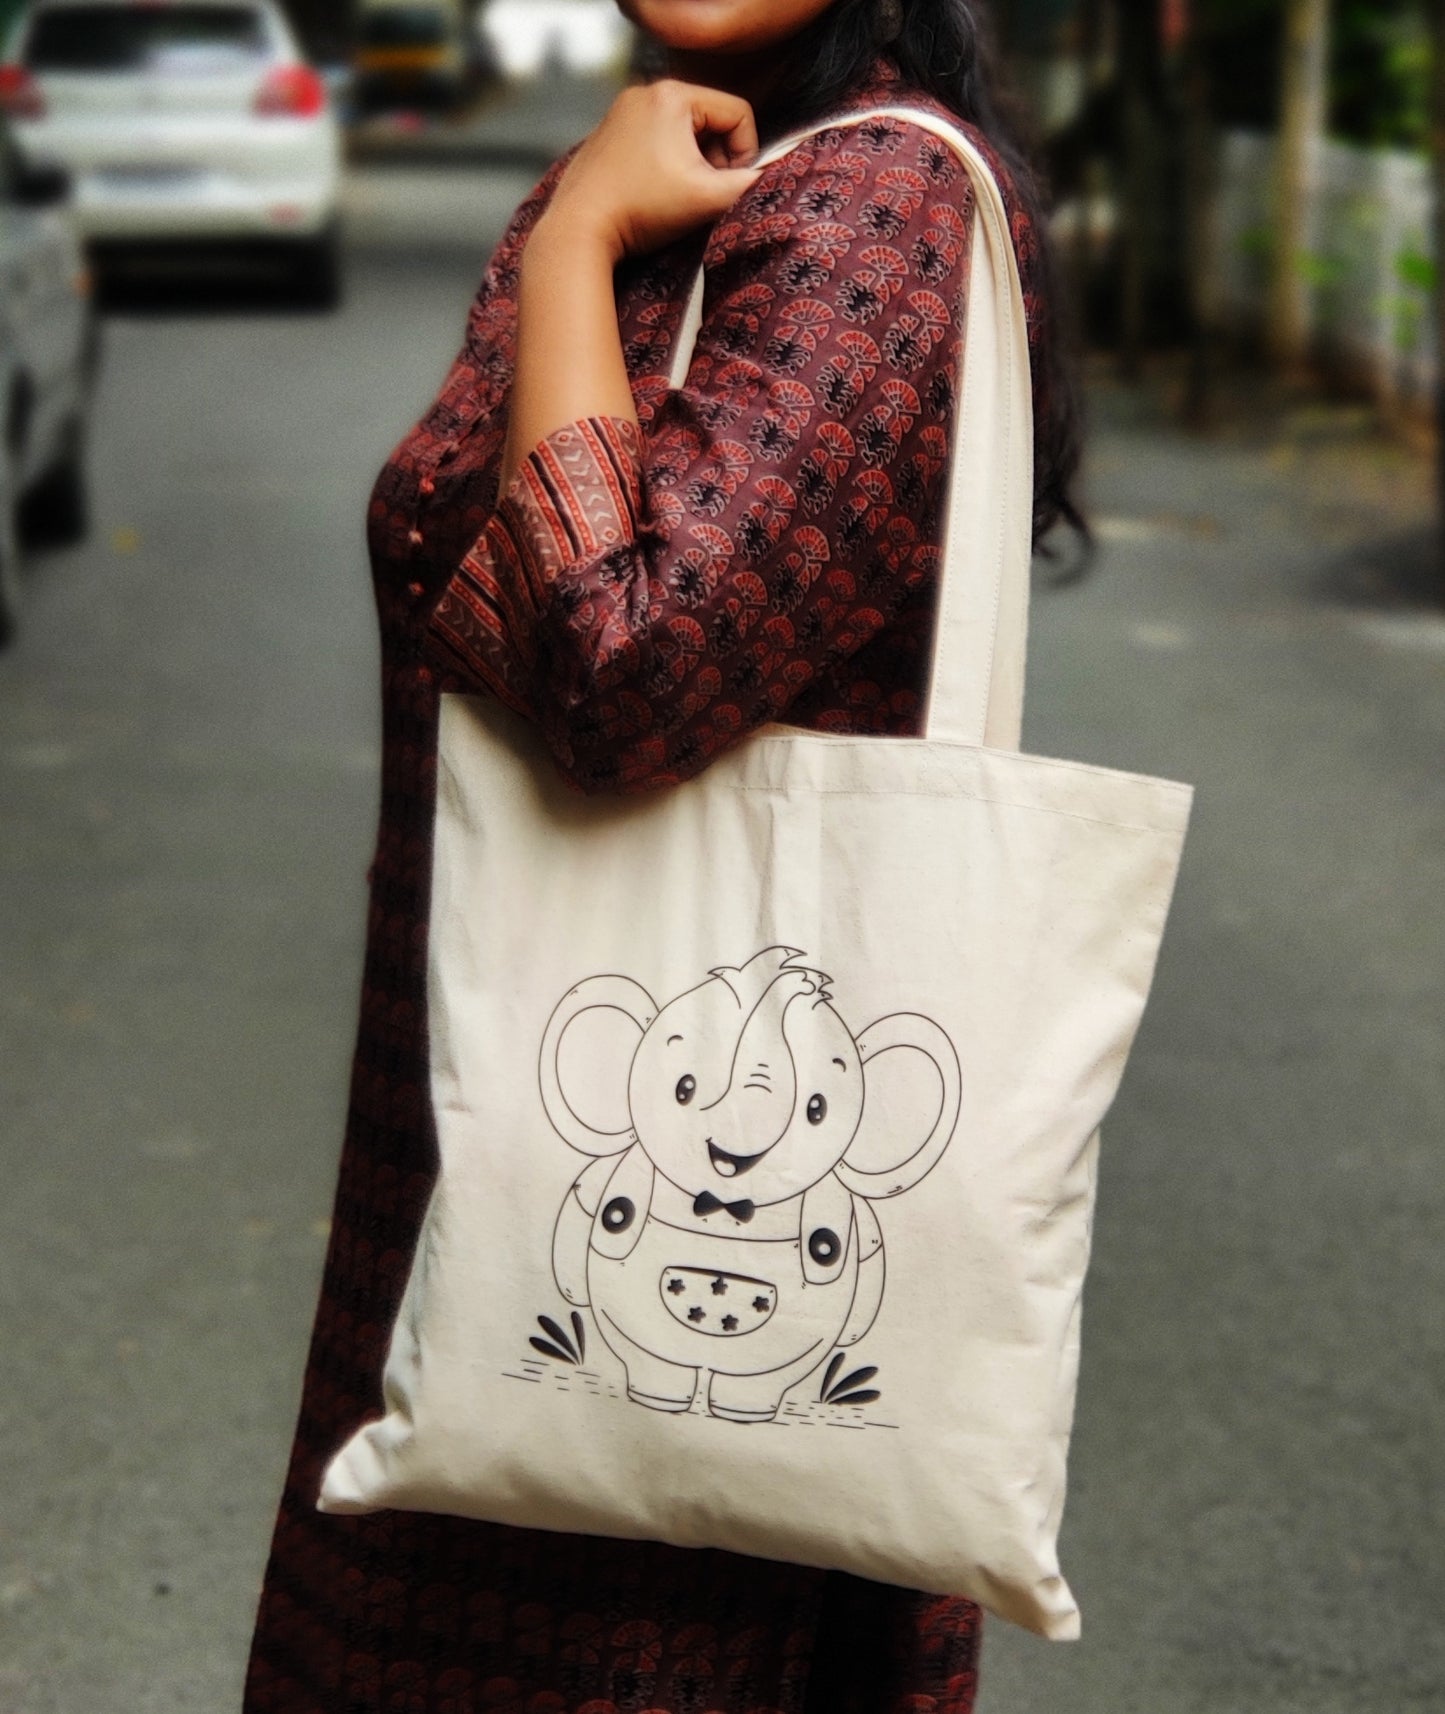 Baby Elephant Tote Bags (Set of 2) - Miss Compass Hands